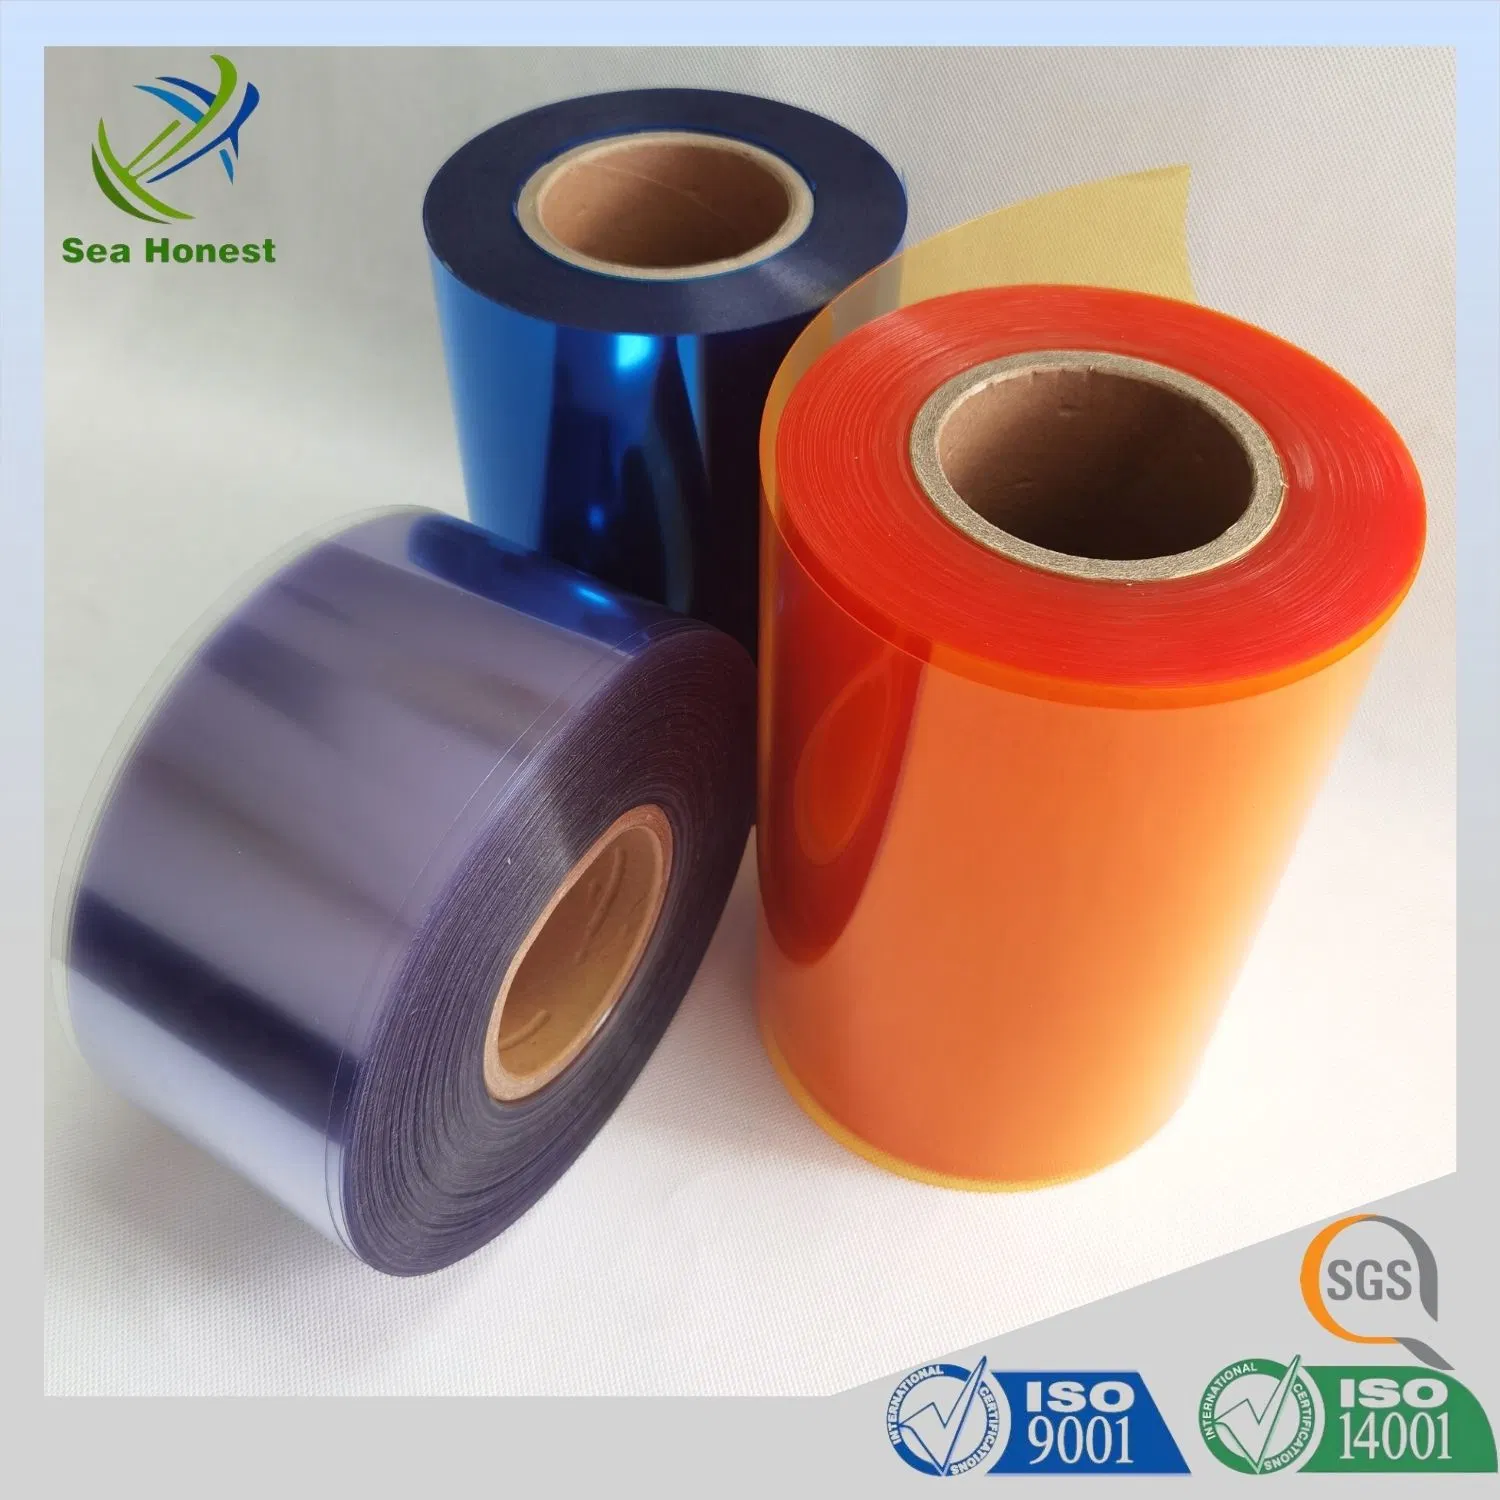 China Manufacturer Plastic Pack Material Shrink Film PVC Film Rigid HIPS PC Pet PP PVC Sheet Roll for Thermoforming Folding Printing Packaigng Ect